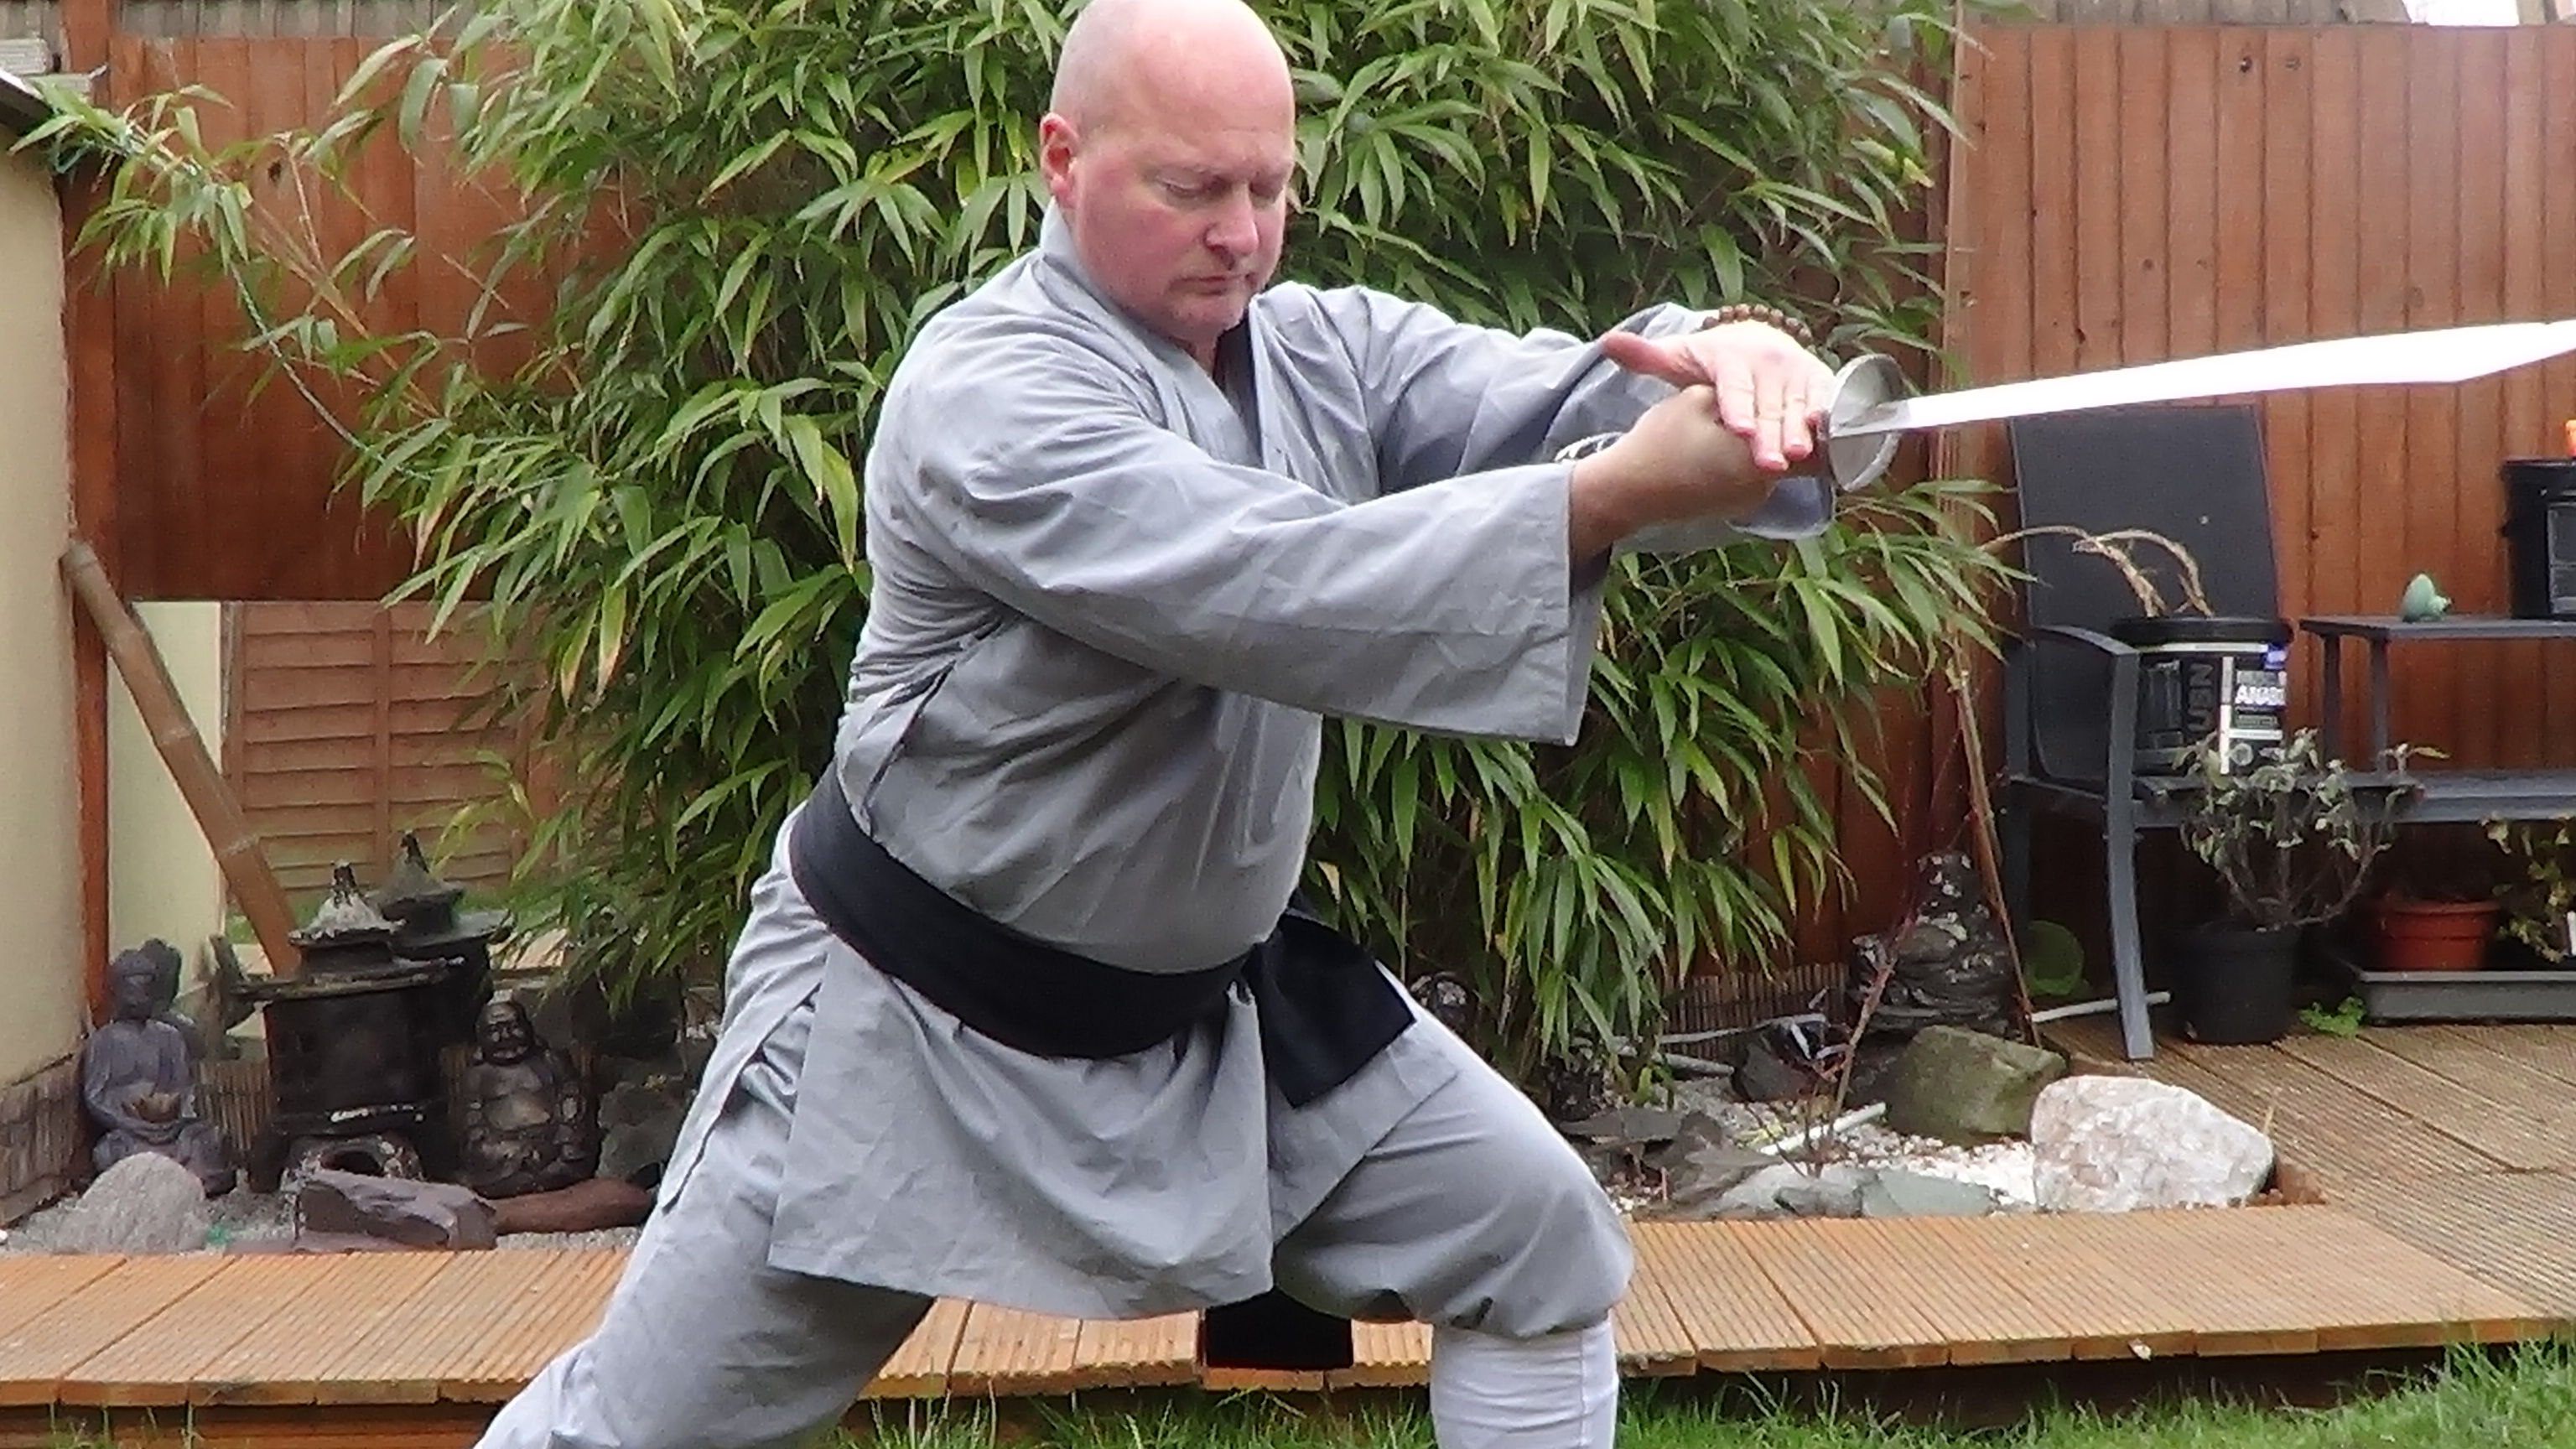 ADAM RICHARDS FIGHT DIRECTOR FILMING CHINESE BROADSWORD ON SET